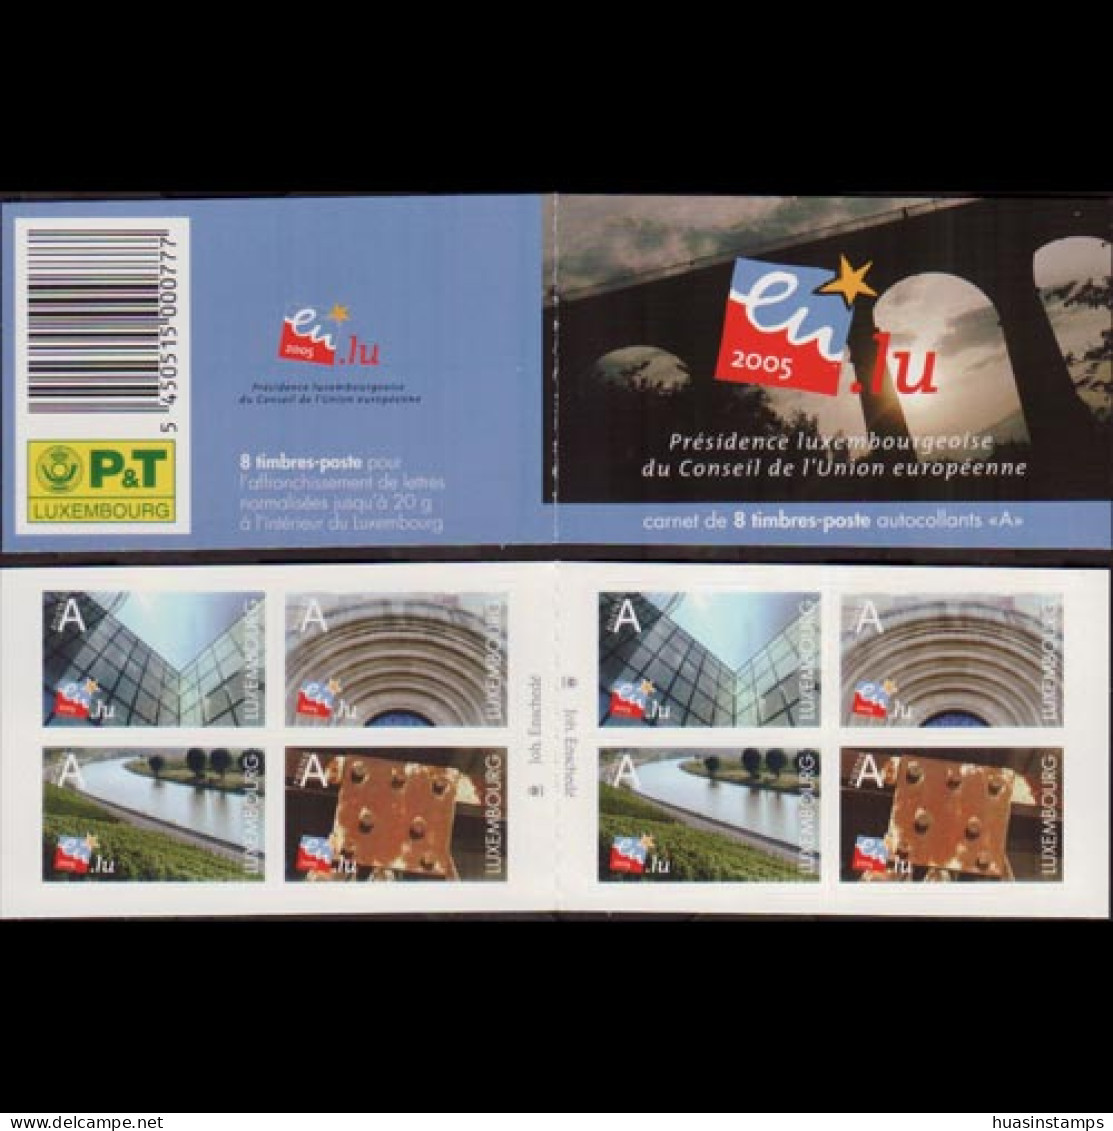 LUXEMBOURG 2005 - Scott# 1153 Booklet-Eurpean Council MNH - Unused Stamps